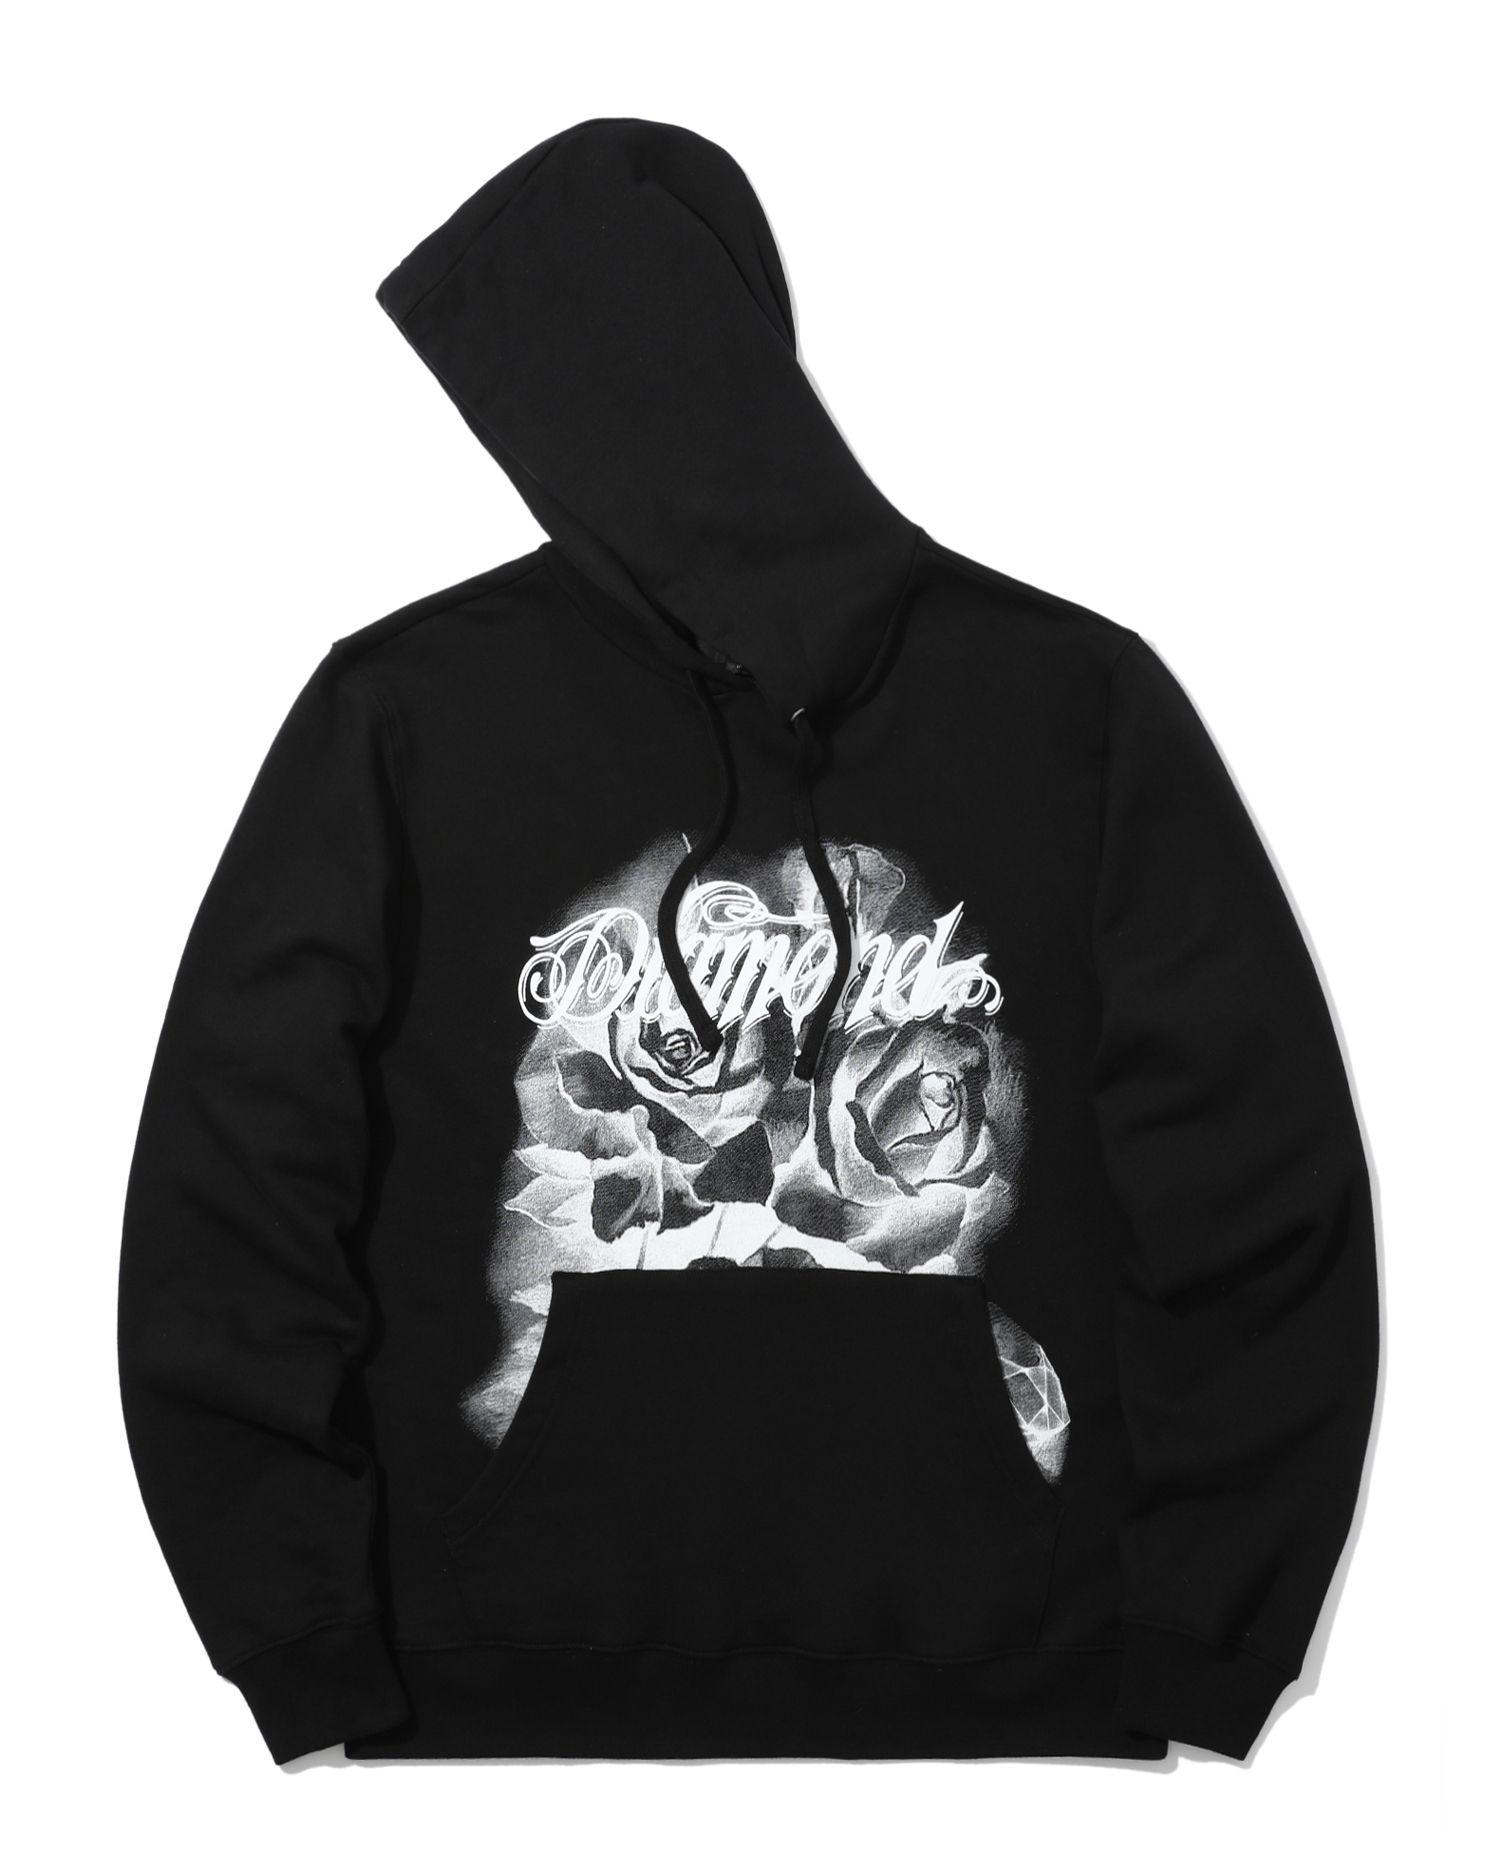 Giant Script Blosson hoodie by DIAMOND SUPPLY CO.